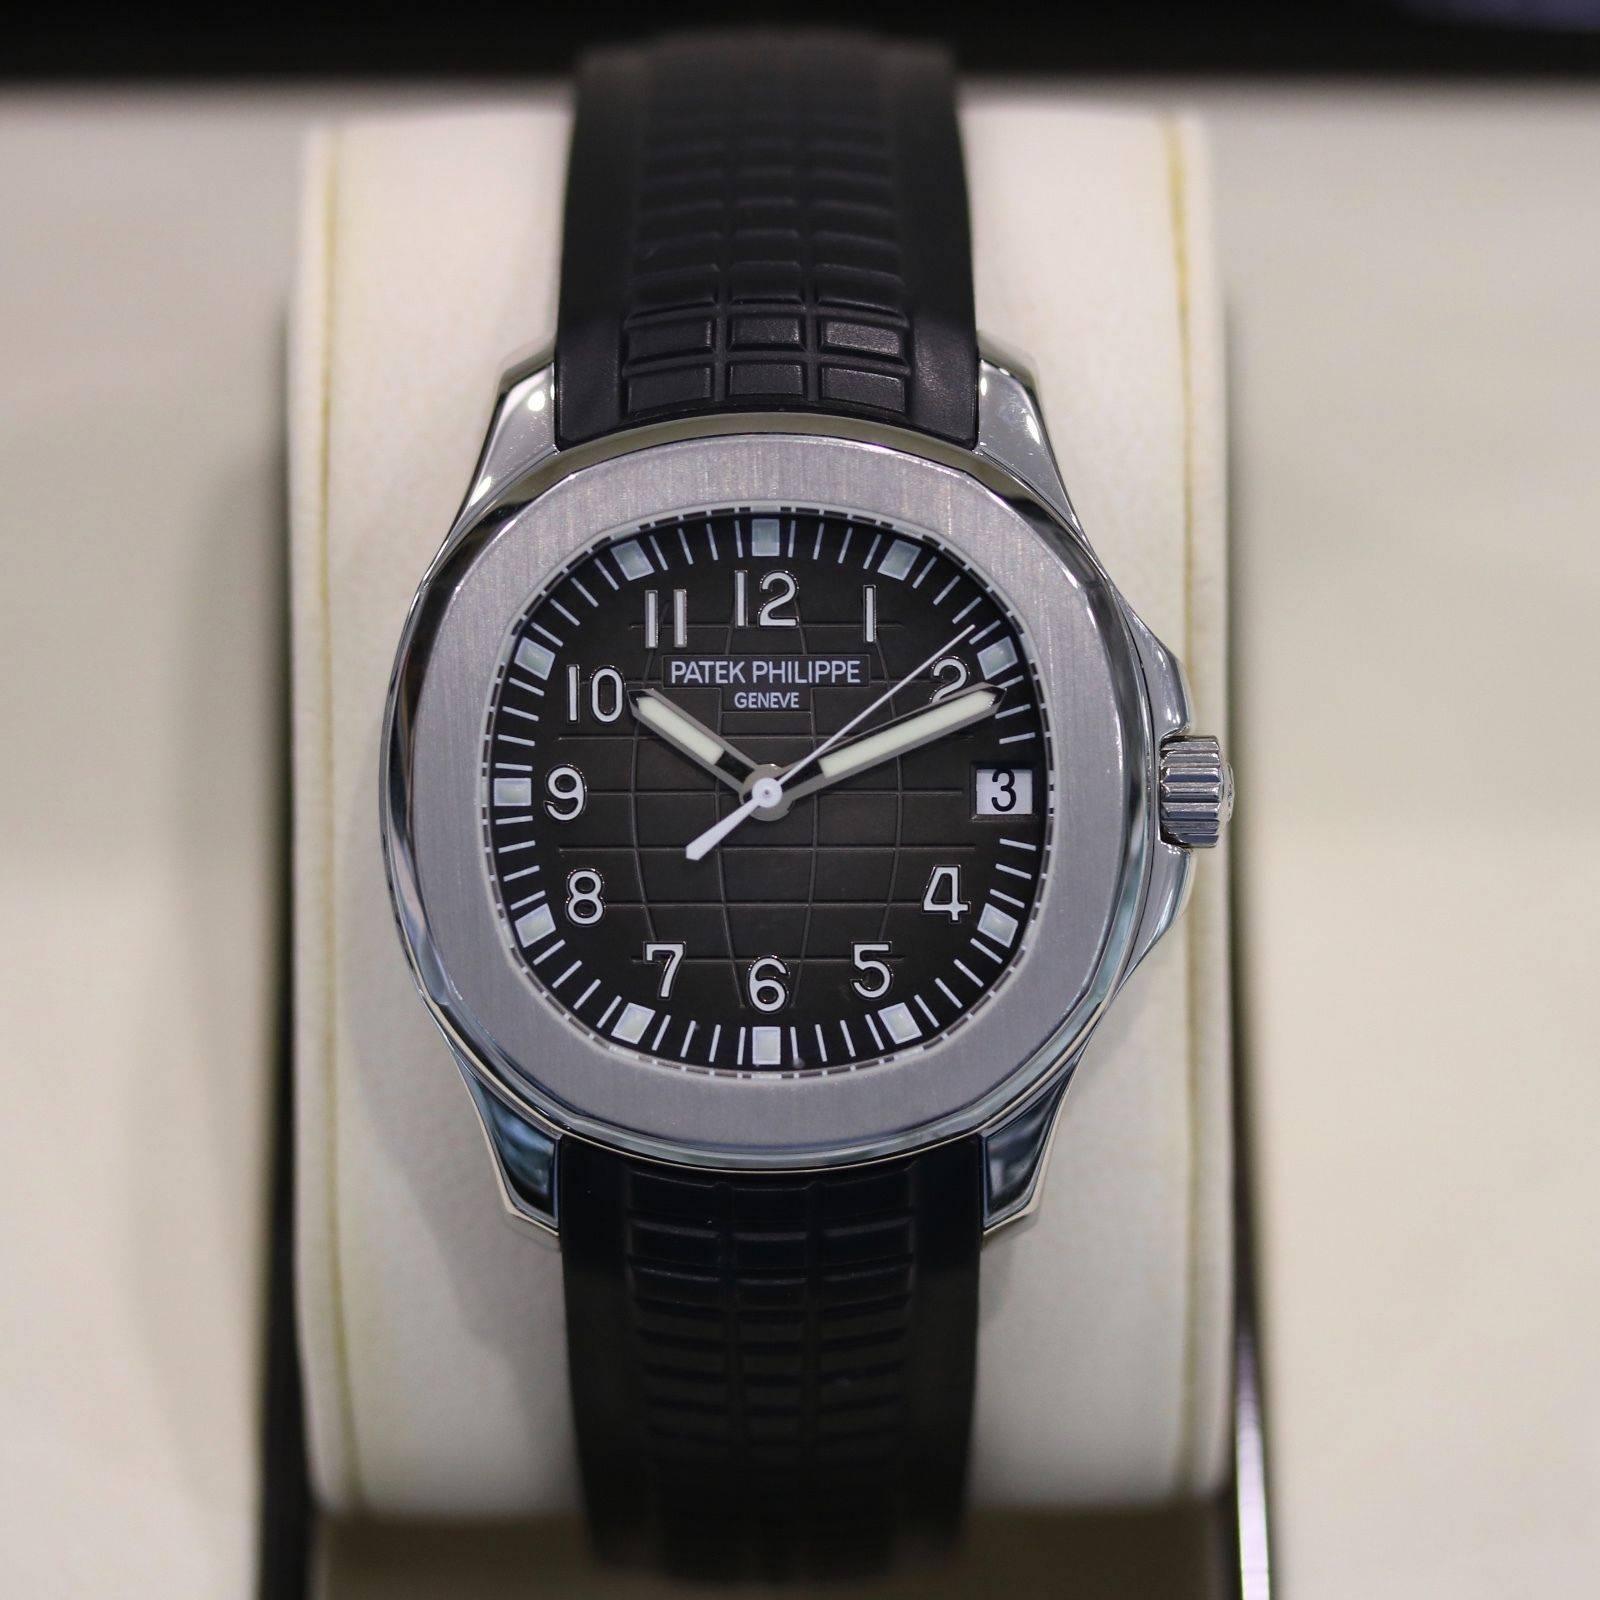 Brand Name: Patek Philippe
Style Number: 5165a-001
Also Calle: 5165A
Series: Aquanaut
Gender: Men's
Case Material: Stainless Steel 
Dial Color	: Black 
Movement: Automatic
Engine:Patek caliber 324 S C, beats at 28,800 vph, contains 29